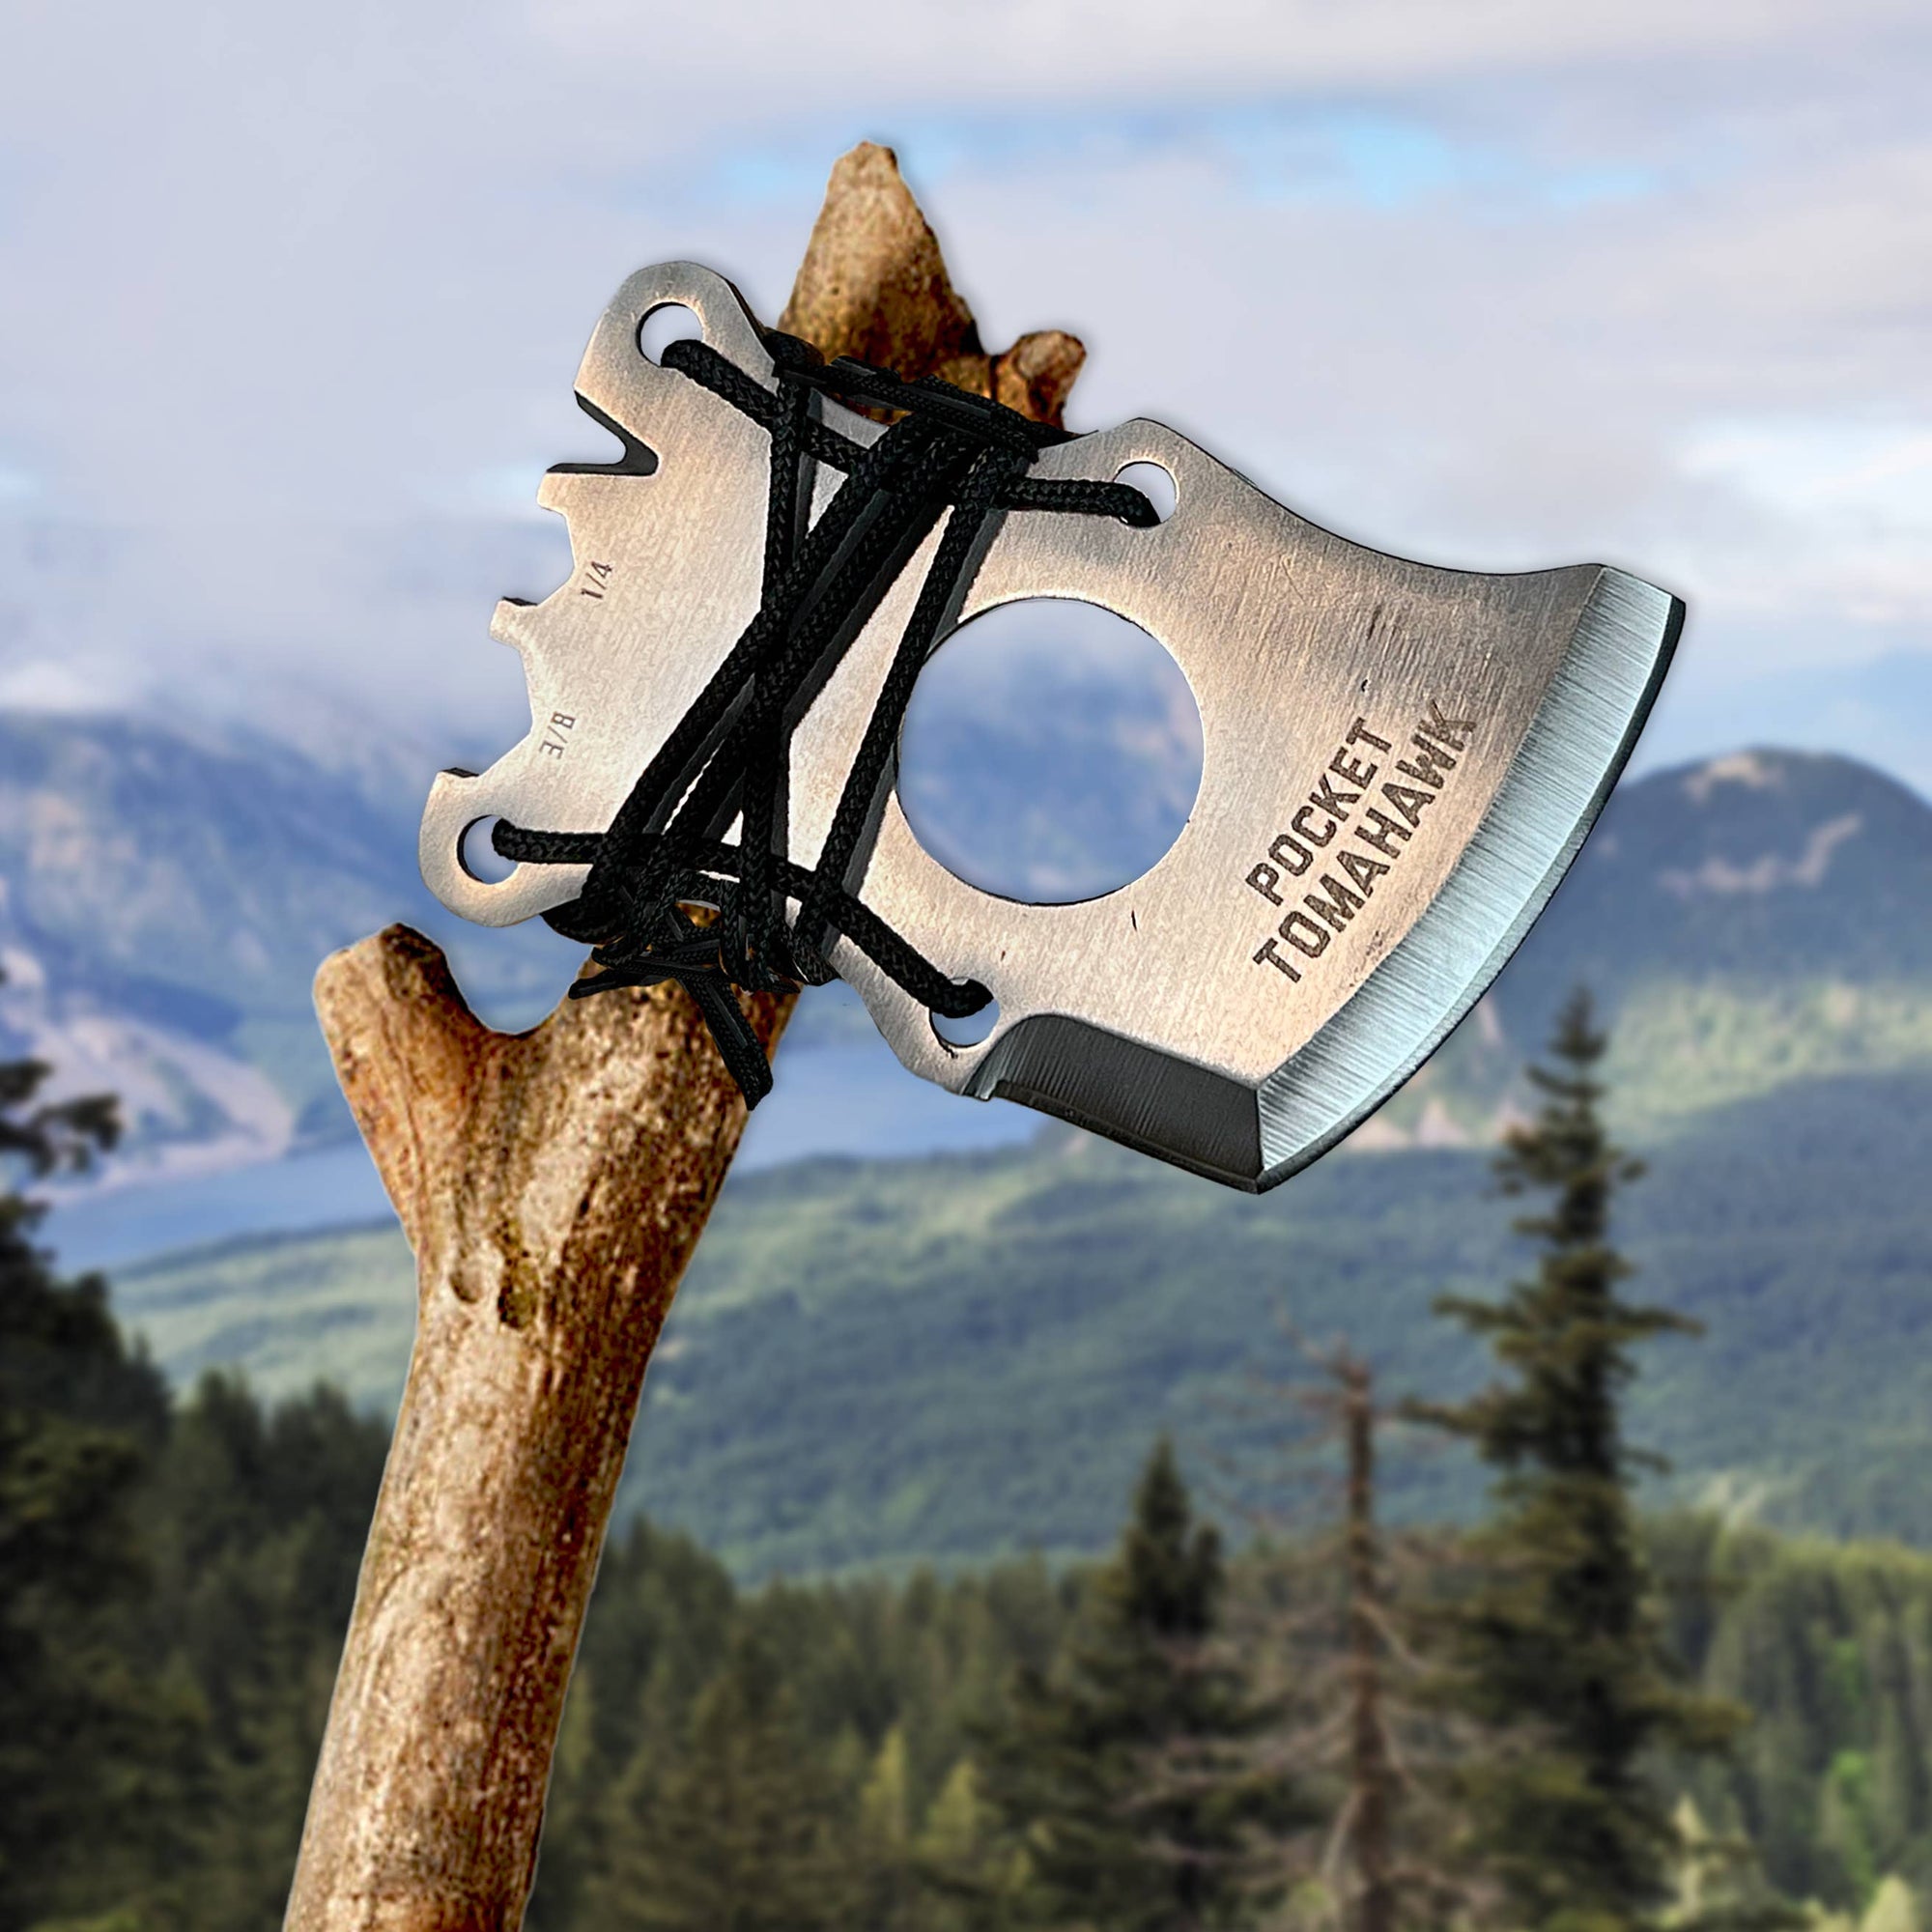 A close-up of a Pocket Tomahawk Axe Multi-Tool attached to a wooden handle with black 550 paracord rope, set against a blurred mountain landscape.